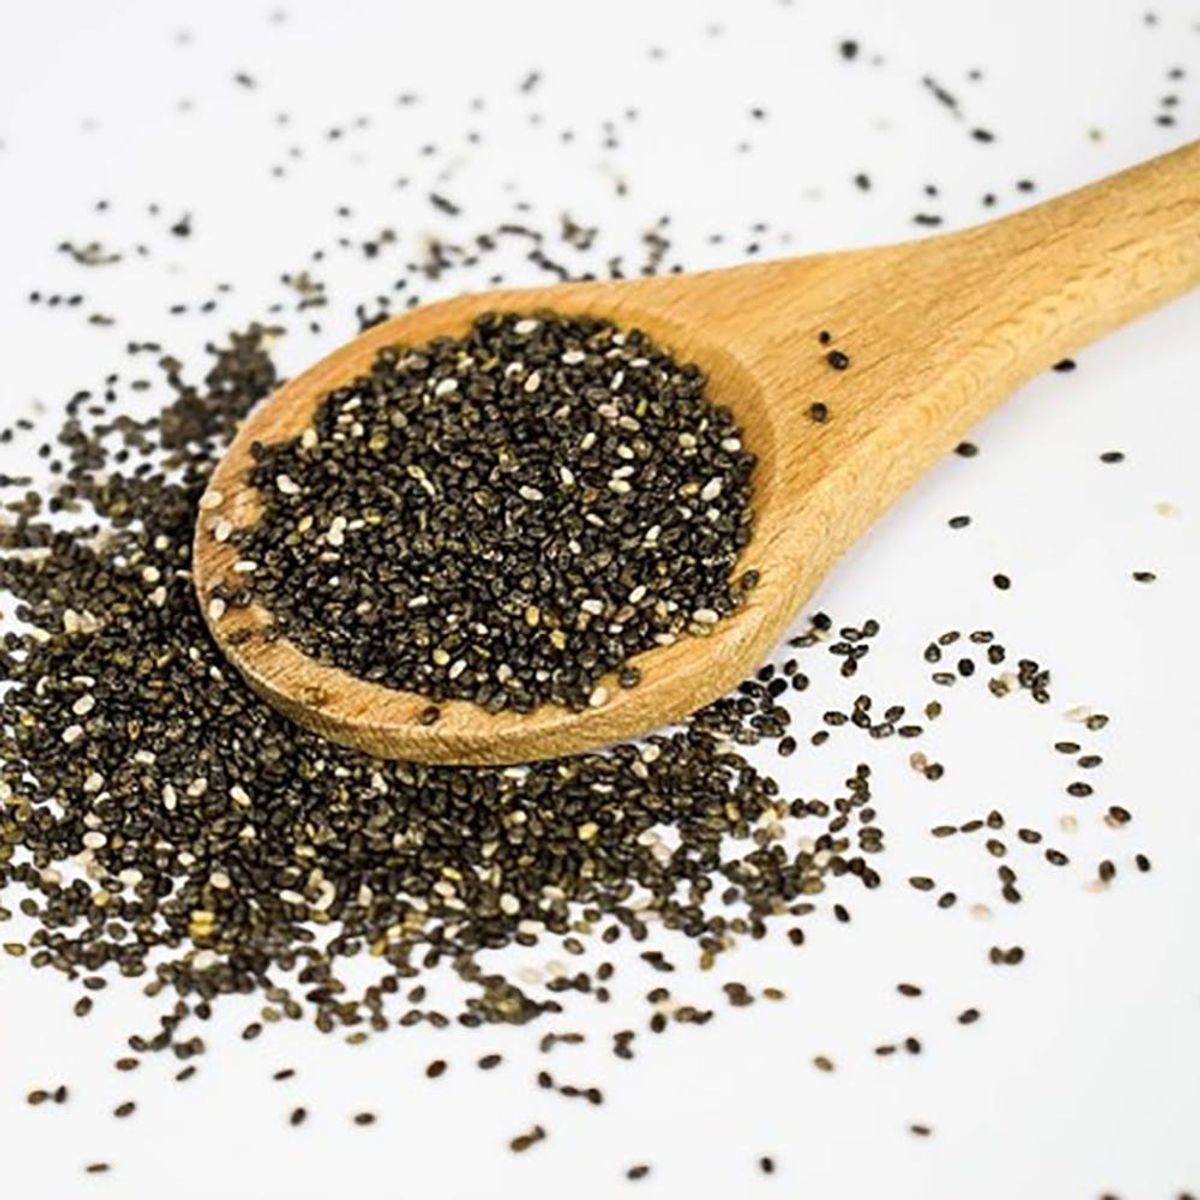 How to Use Chia, Flax, and Hemp the *Right* Way